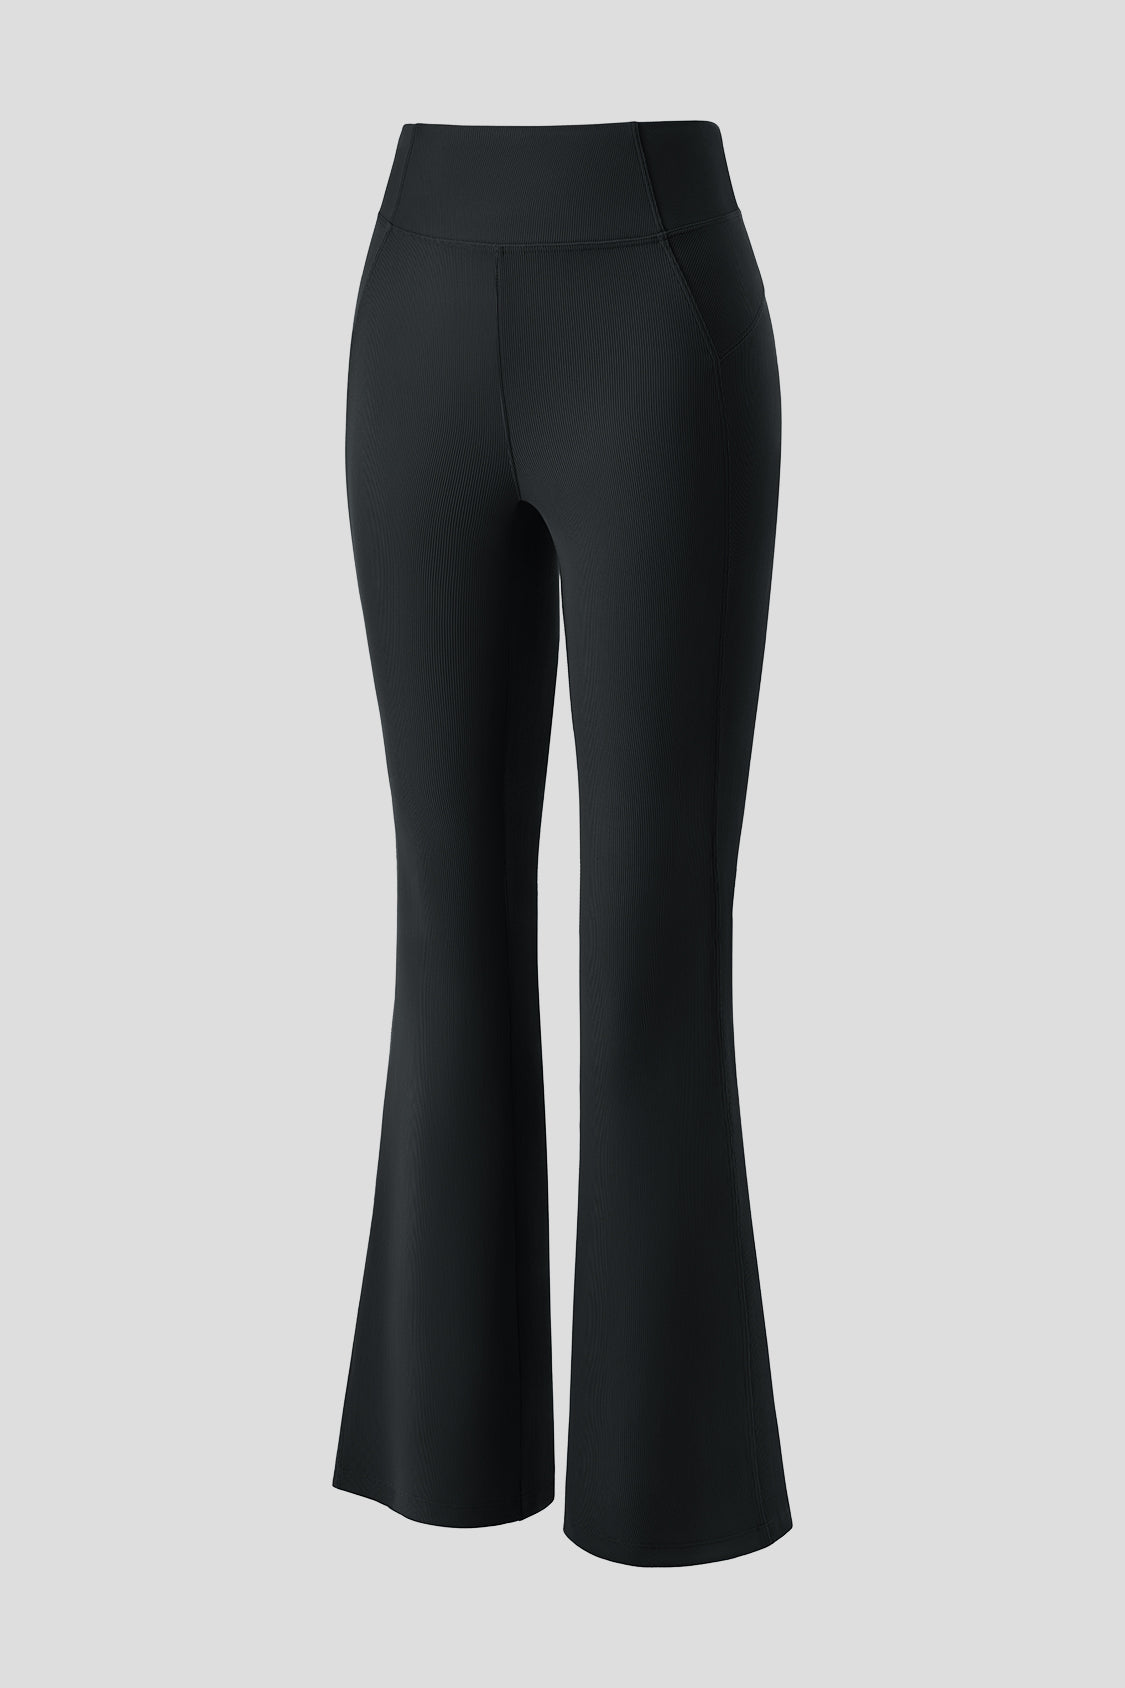 High Elasticity Yoga Bell Bottoms For Women Flared, Tight, And